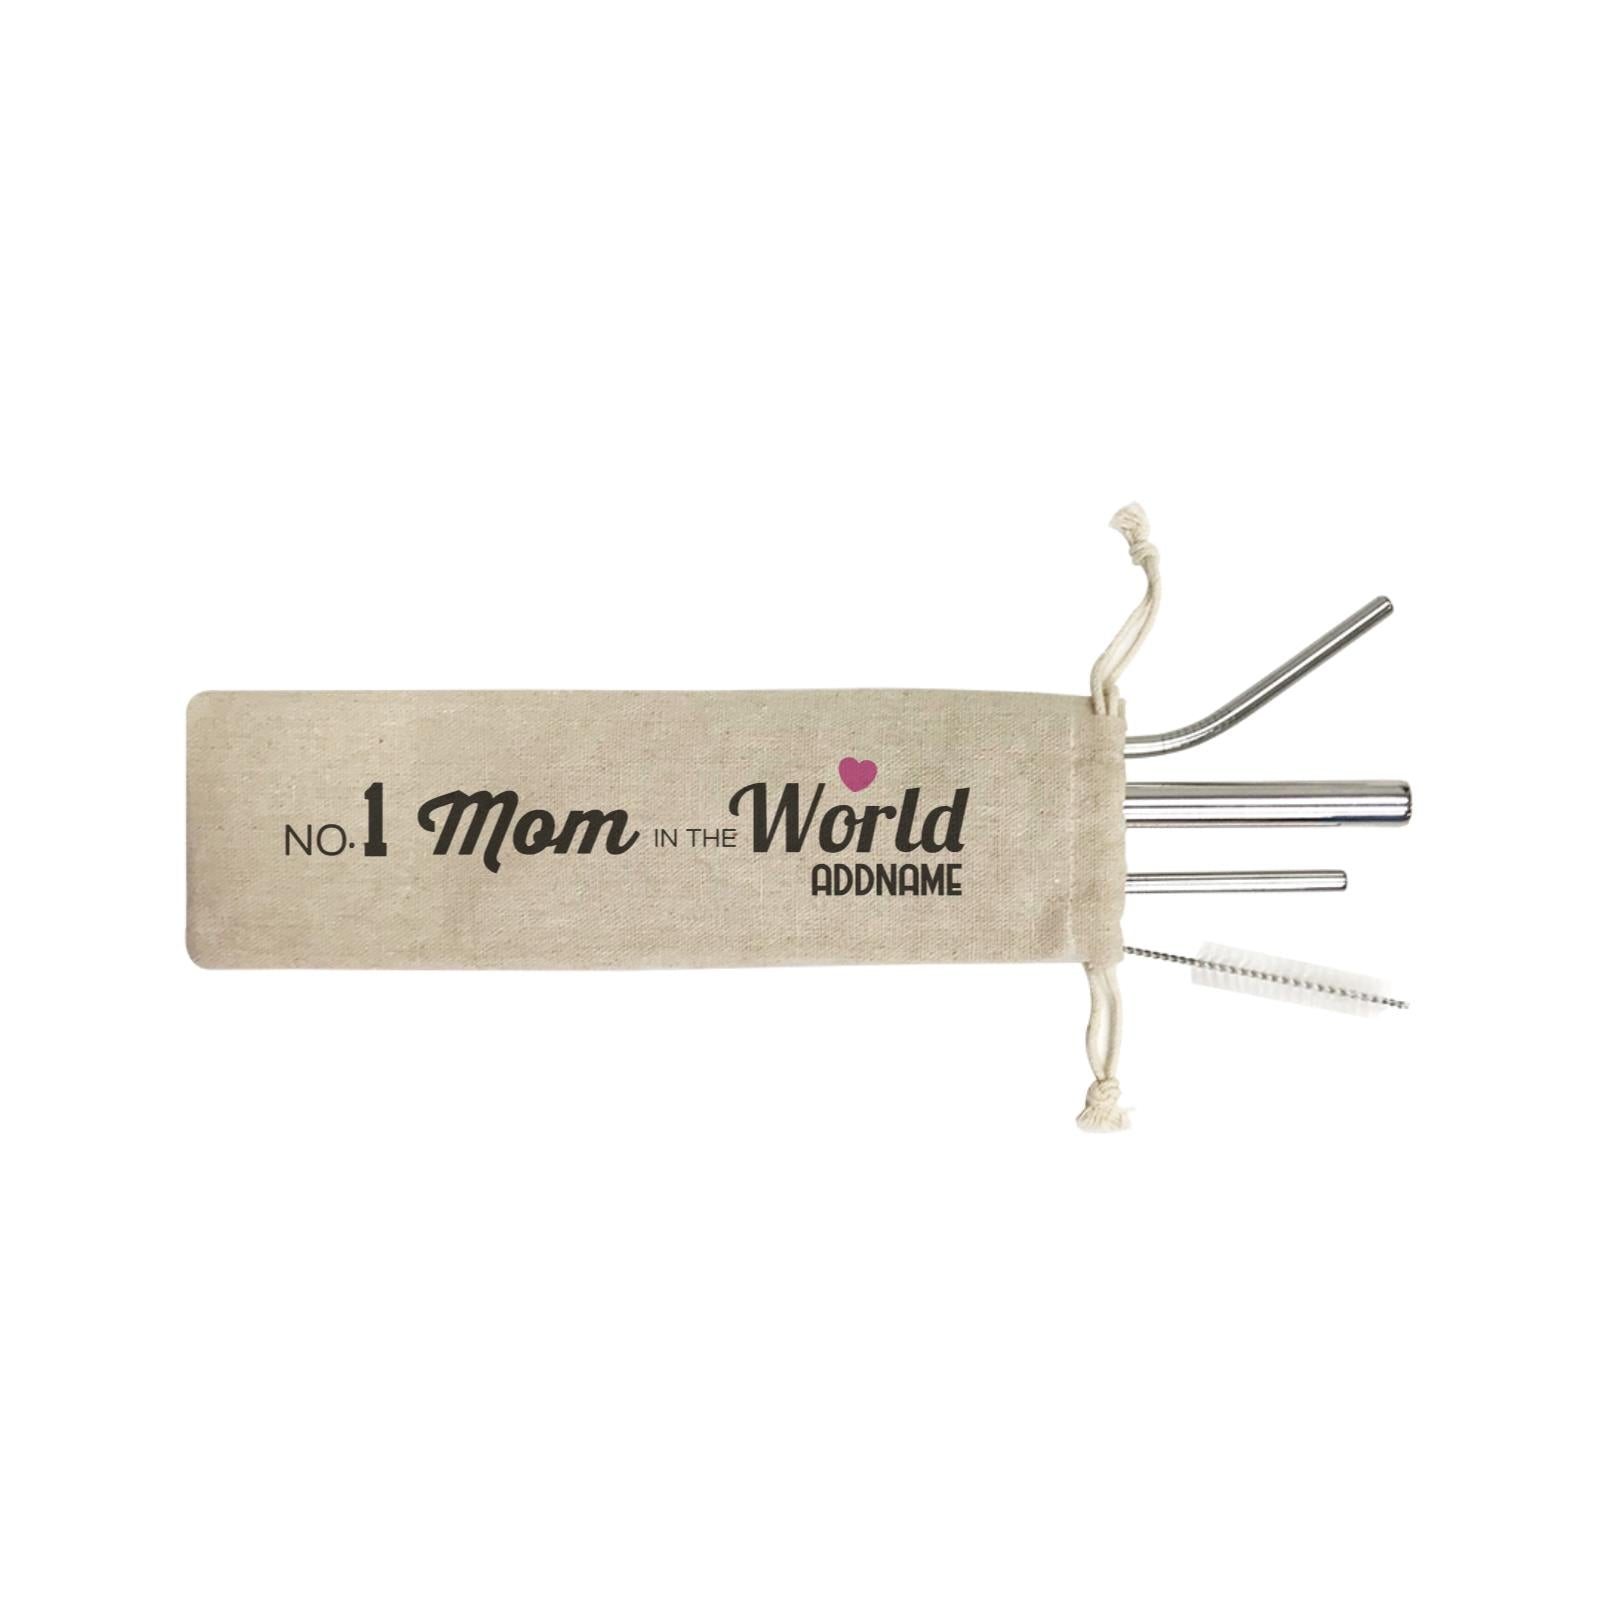 No 1 Mom In The World Addname SB 4-In-1 Stainless Steel Straw Set in Satchel